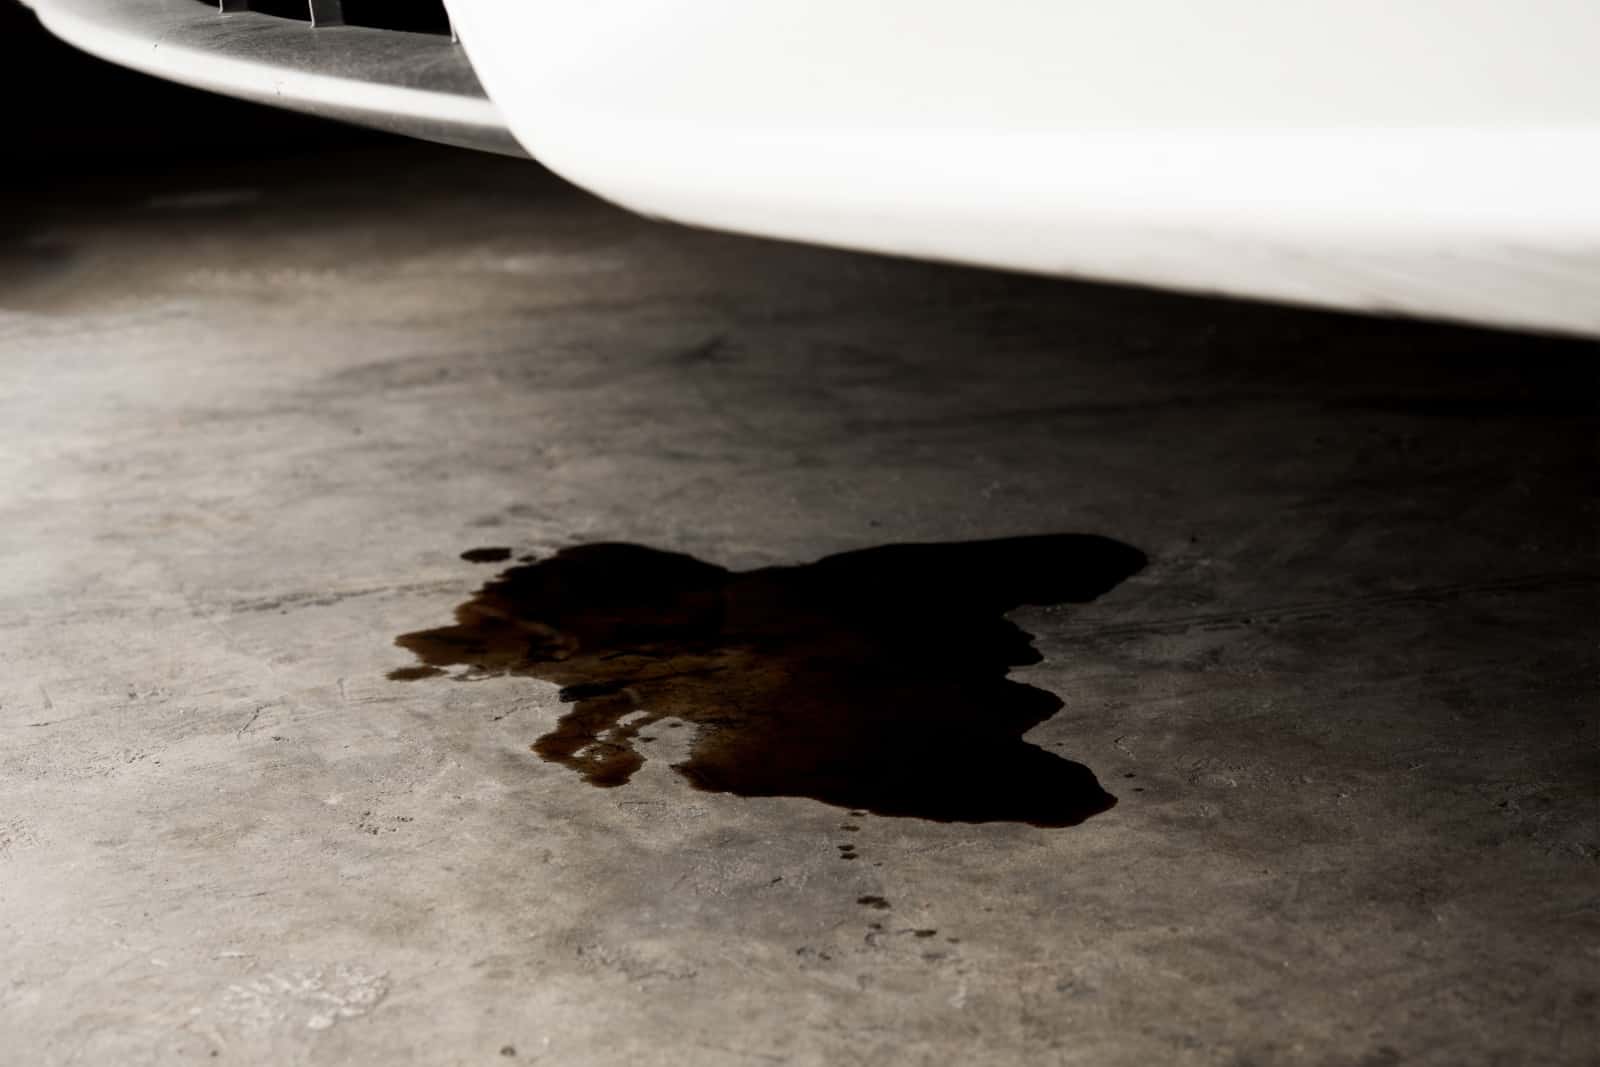 Oil leak or drop from engine of car on concrete floor